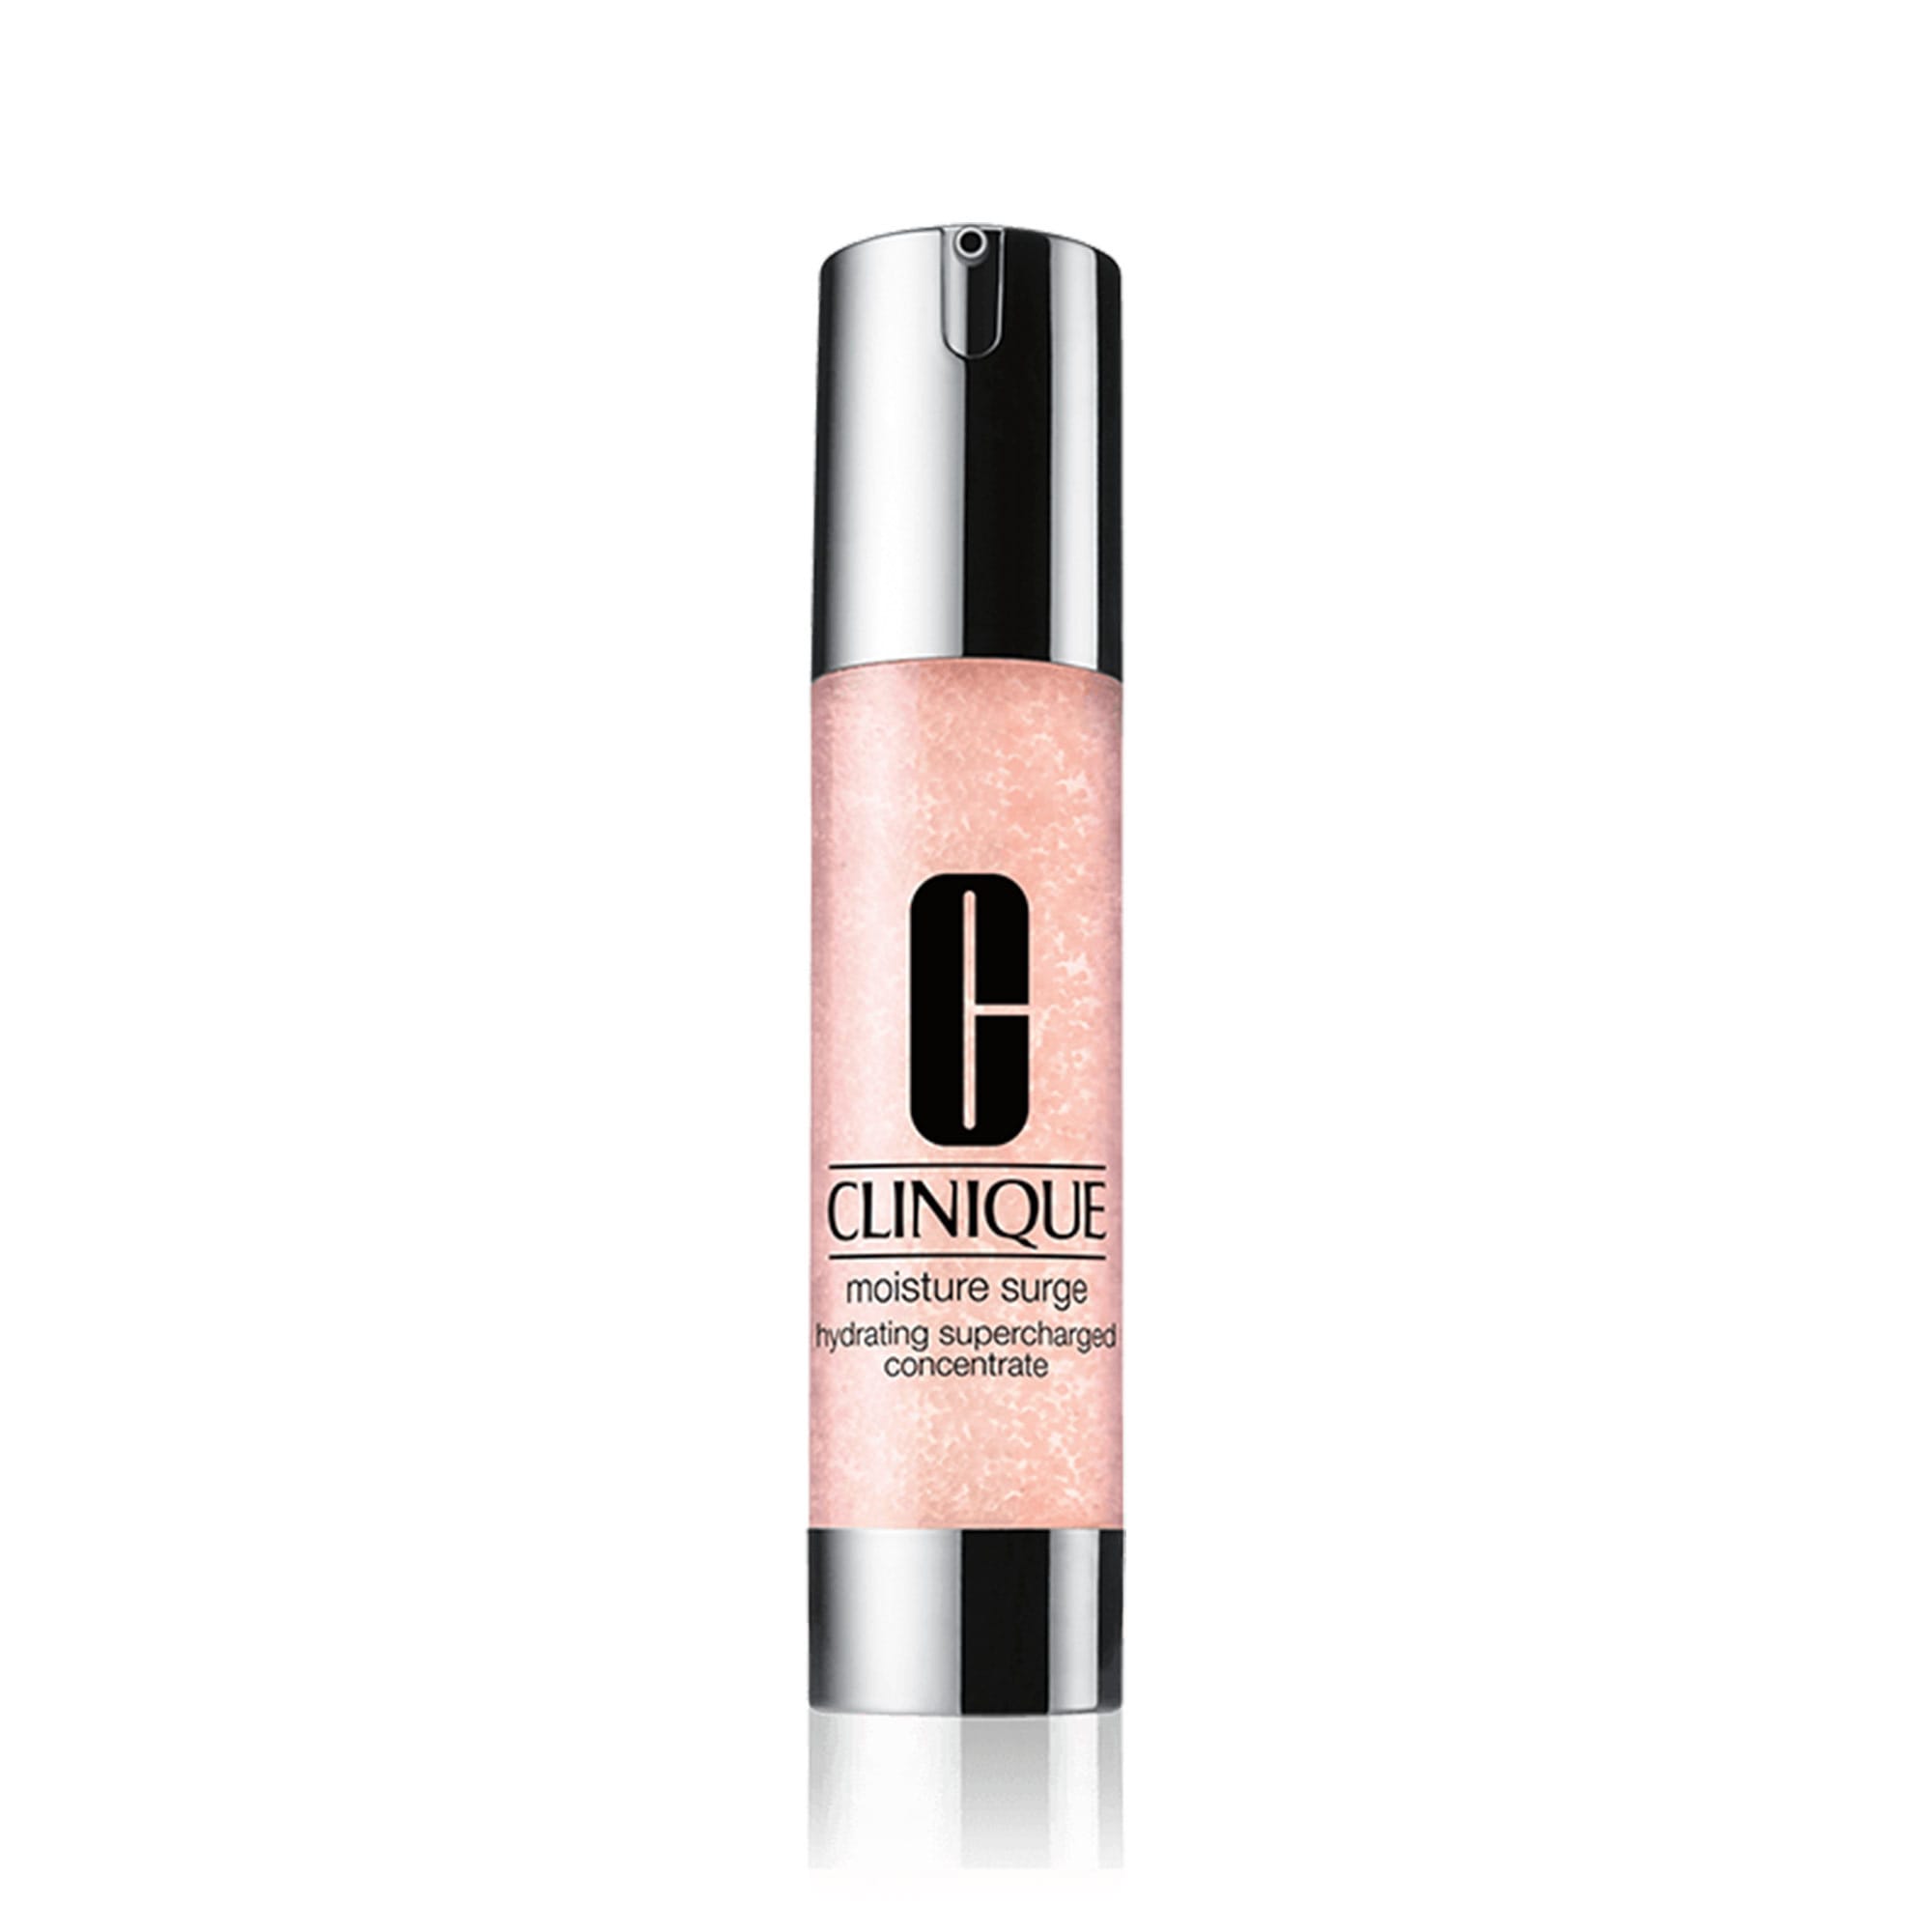 Moisture Surge Hydrating Supercharged Concentrate från Clinique